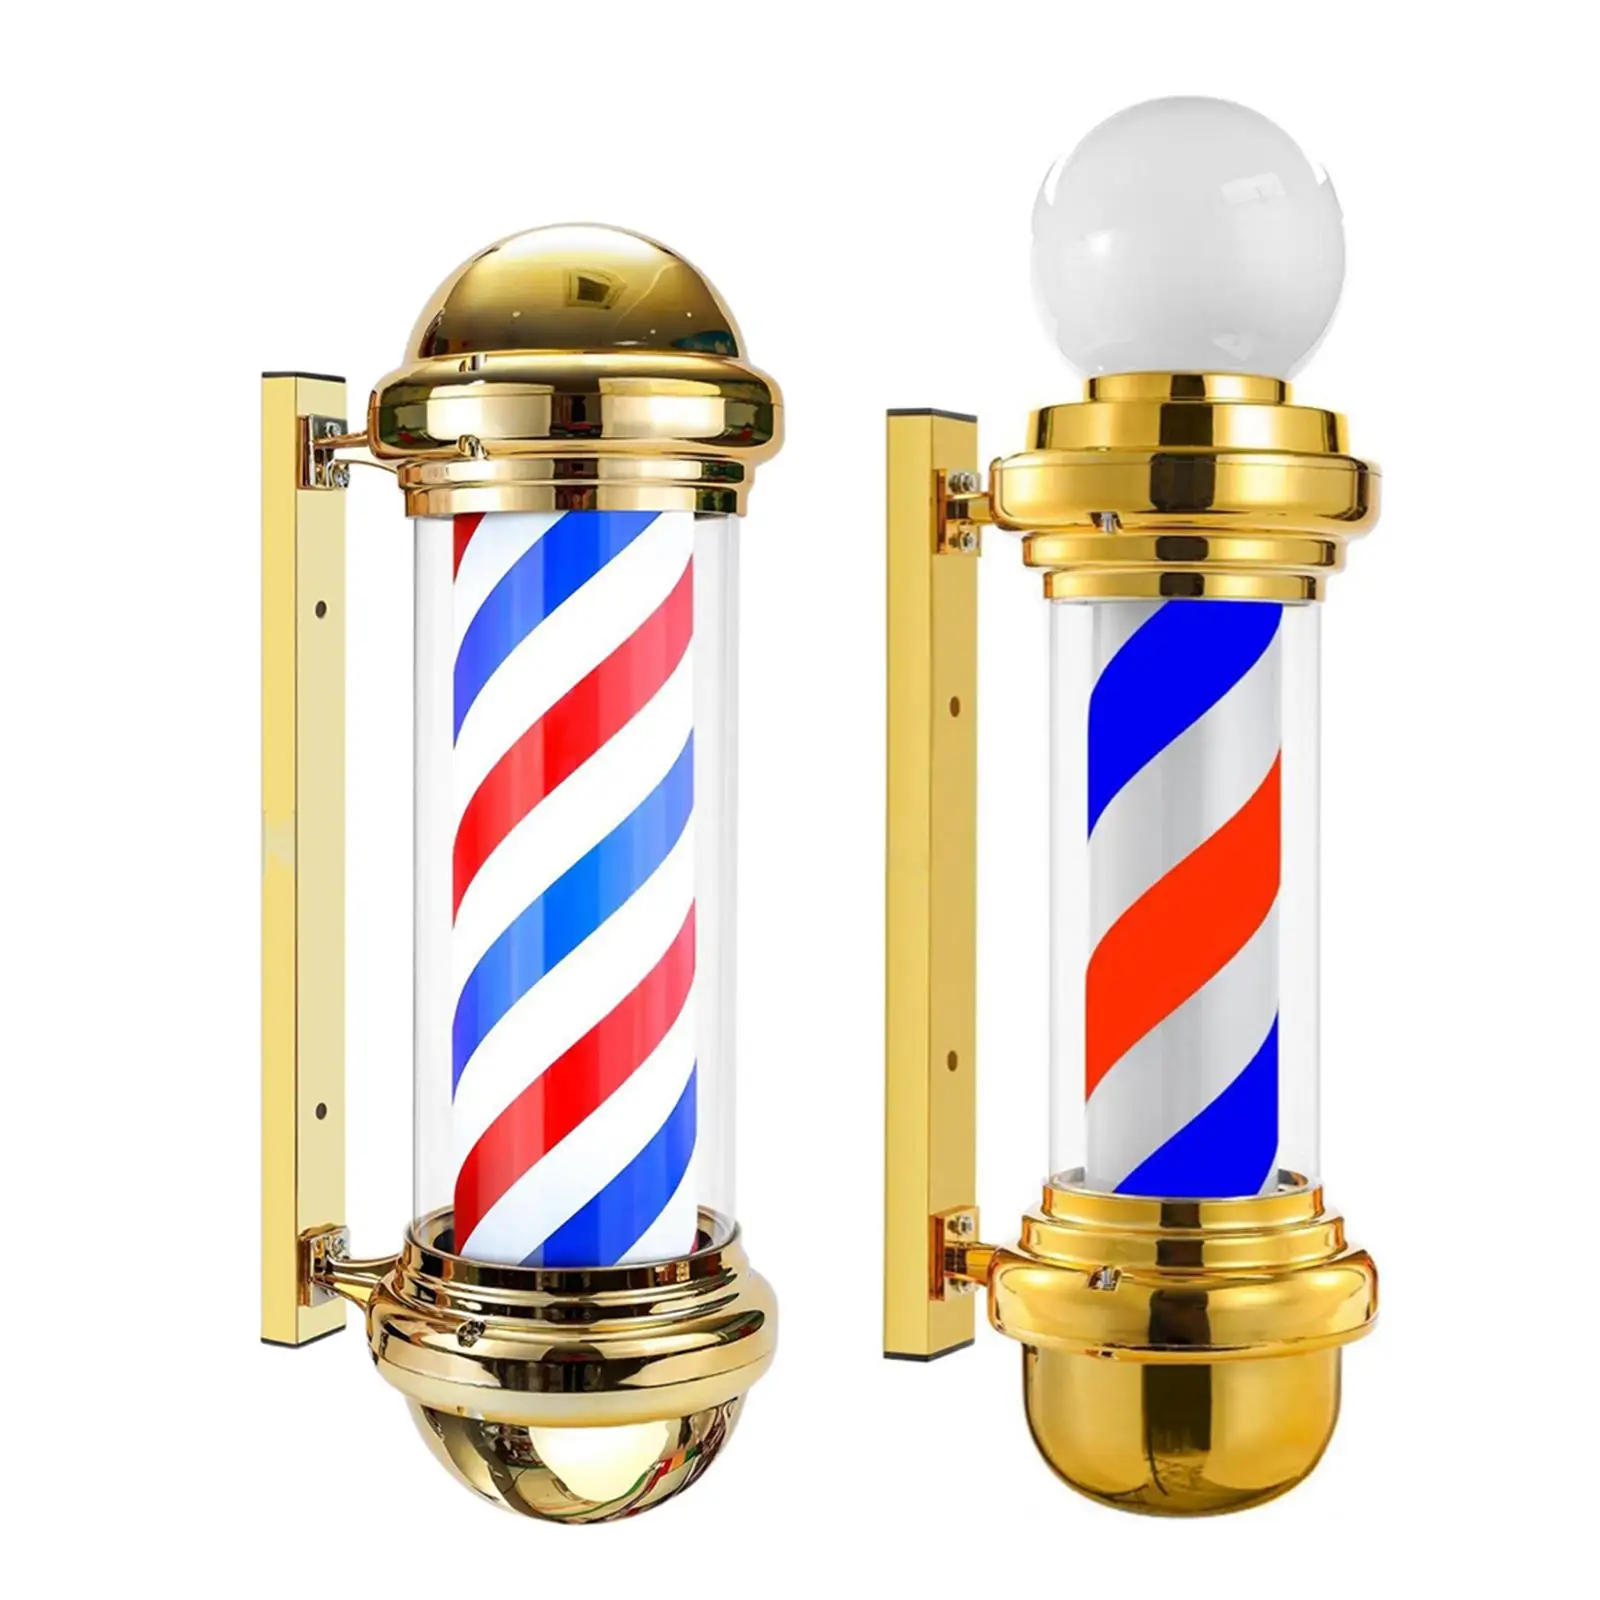 

Barber Pole Open Sign Wall Mount Barbershop Rotating Light Fixture Rotating LED Stripes Light for Outside Outdoors Hair Salon